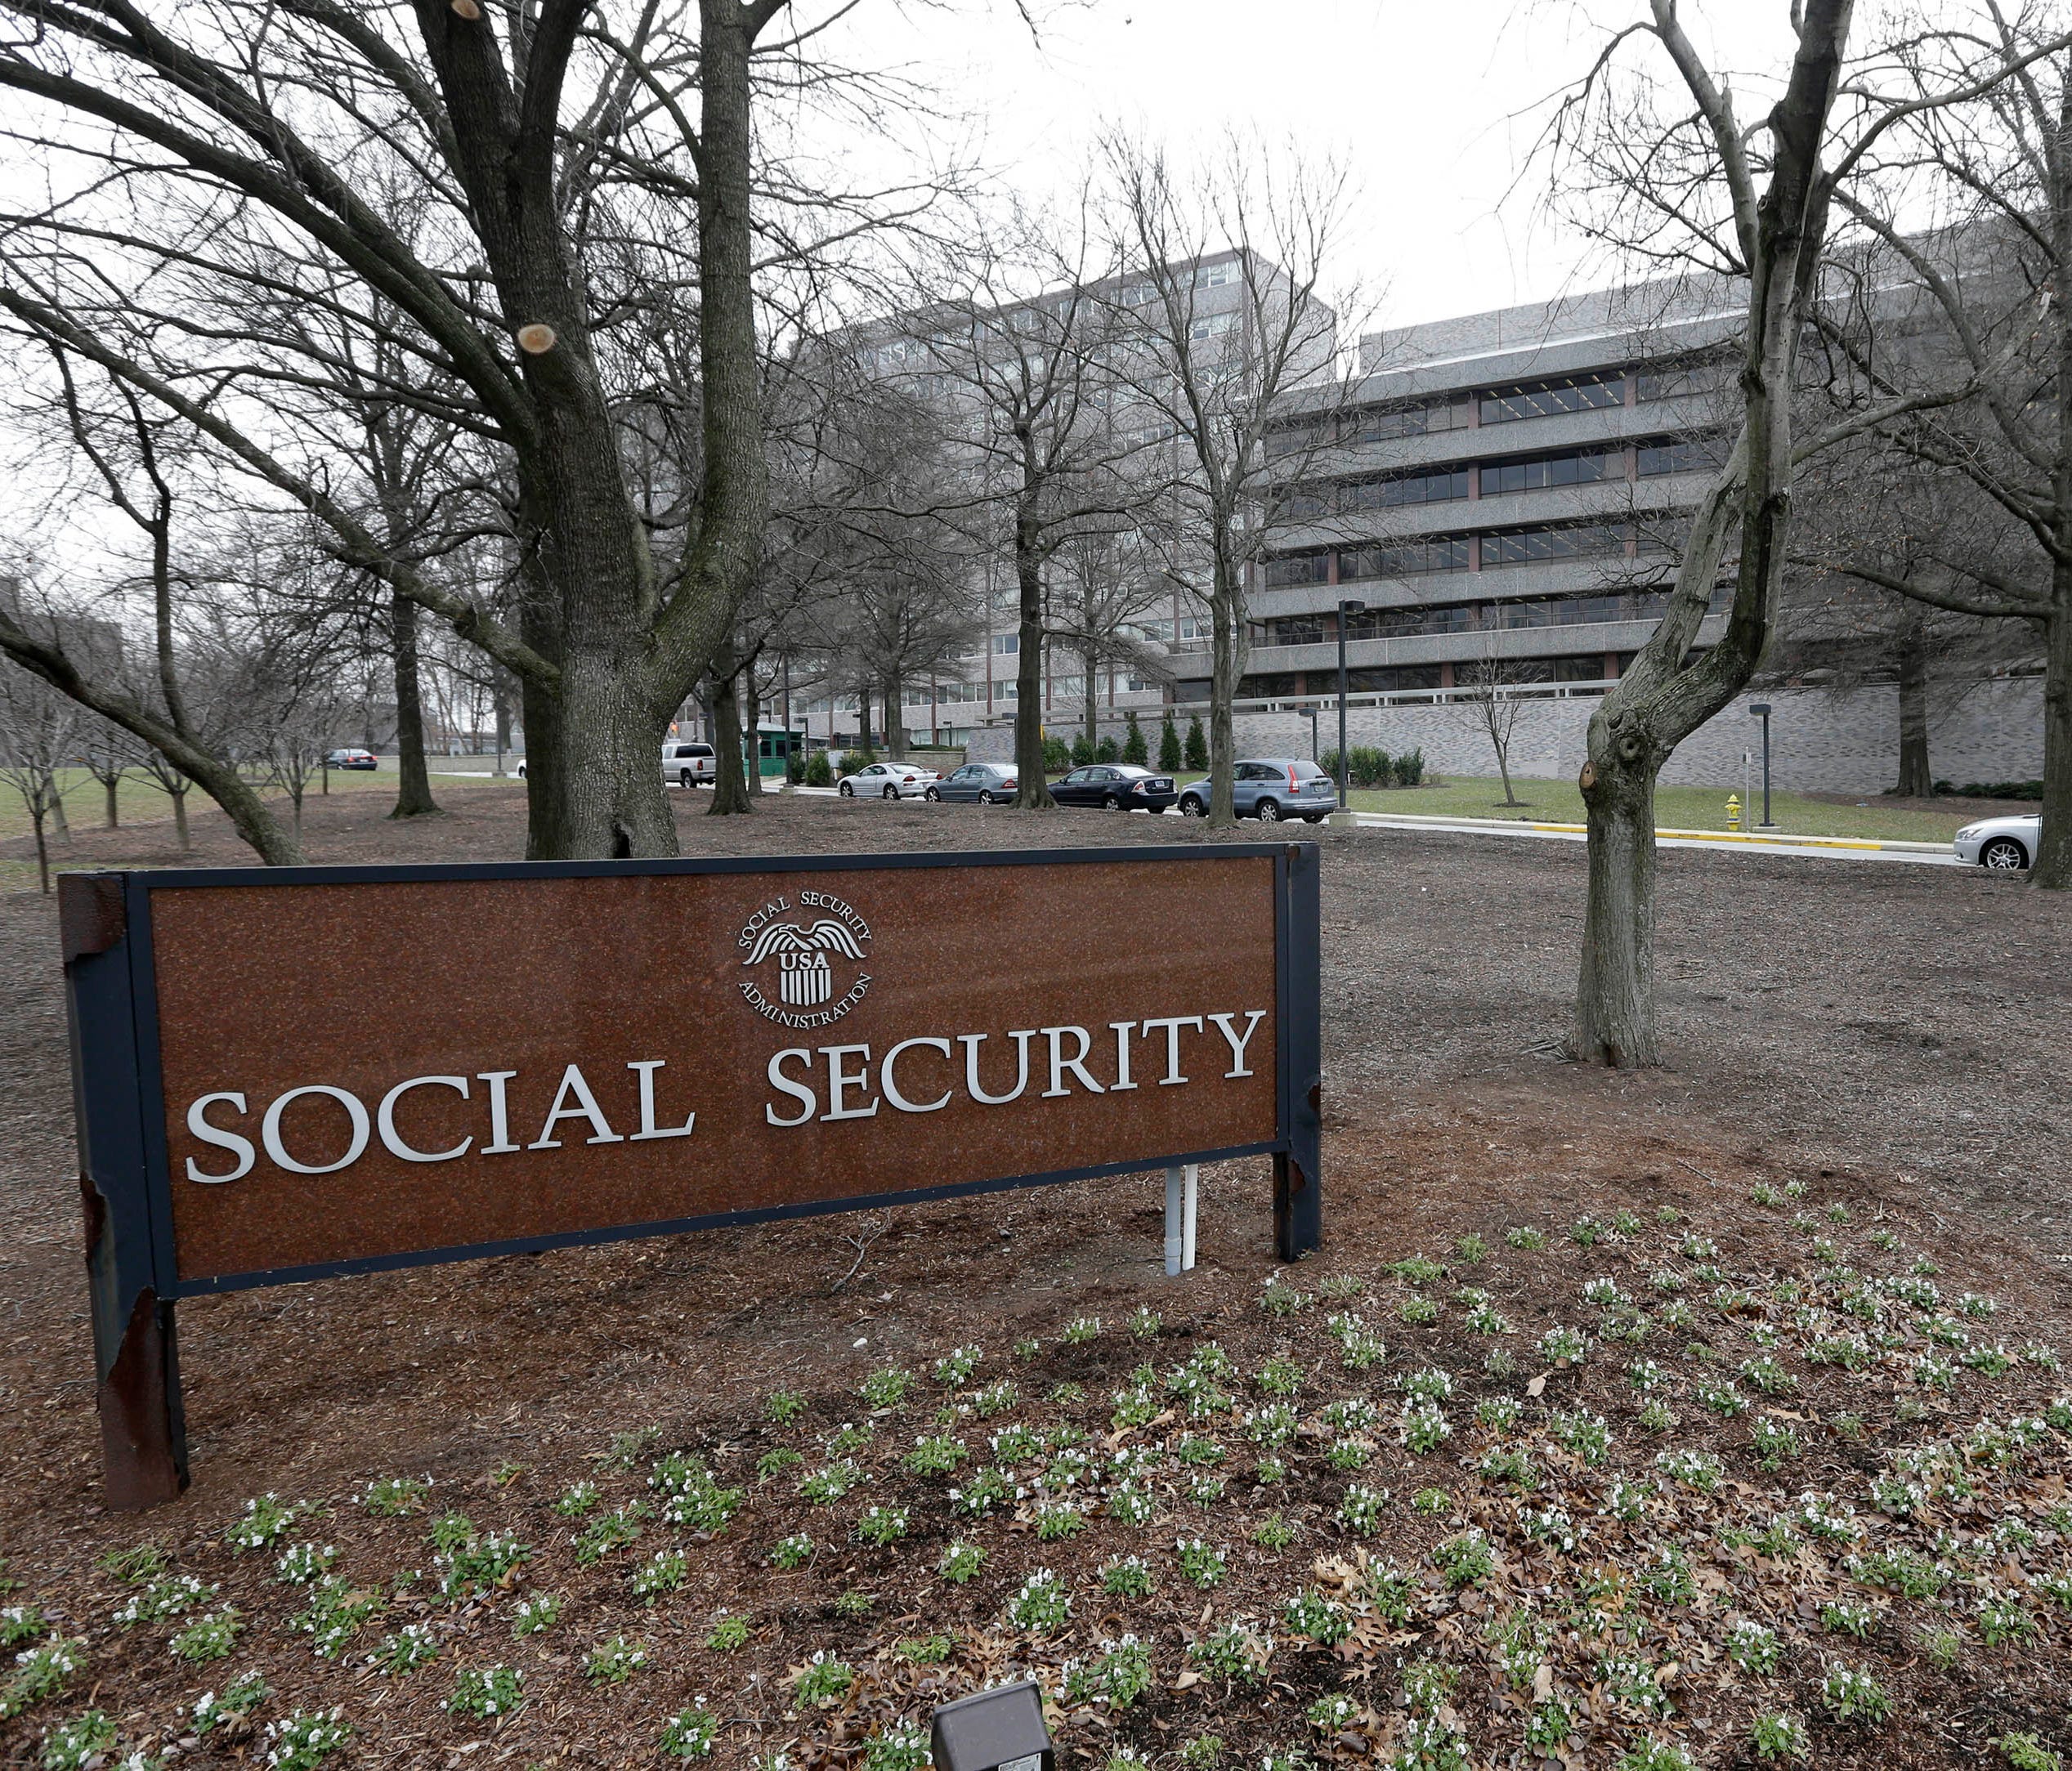 FILE - In this Jan. 11, 2013 file photo, the Social Security Administration's main campus is seen in Woodlawn, Md. Millions of Social Security recipients and other retirees can expect another small increase in benefits in 2018. Preliminary figures su